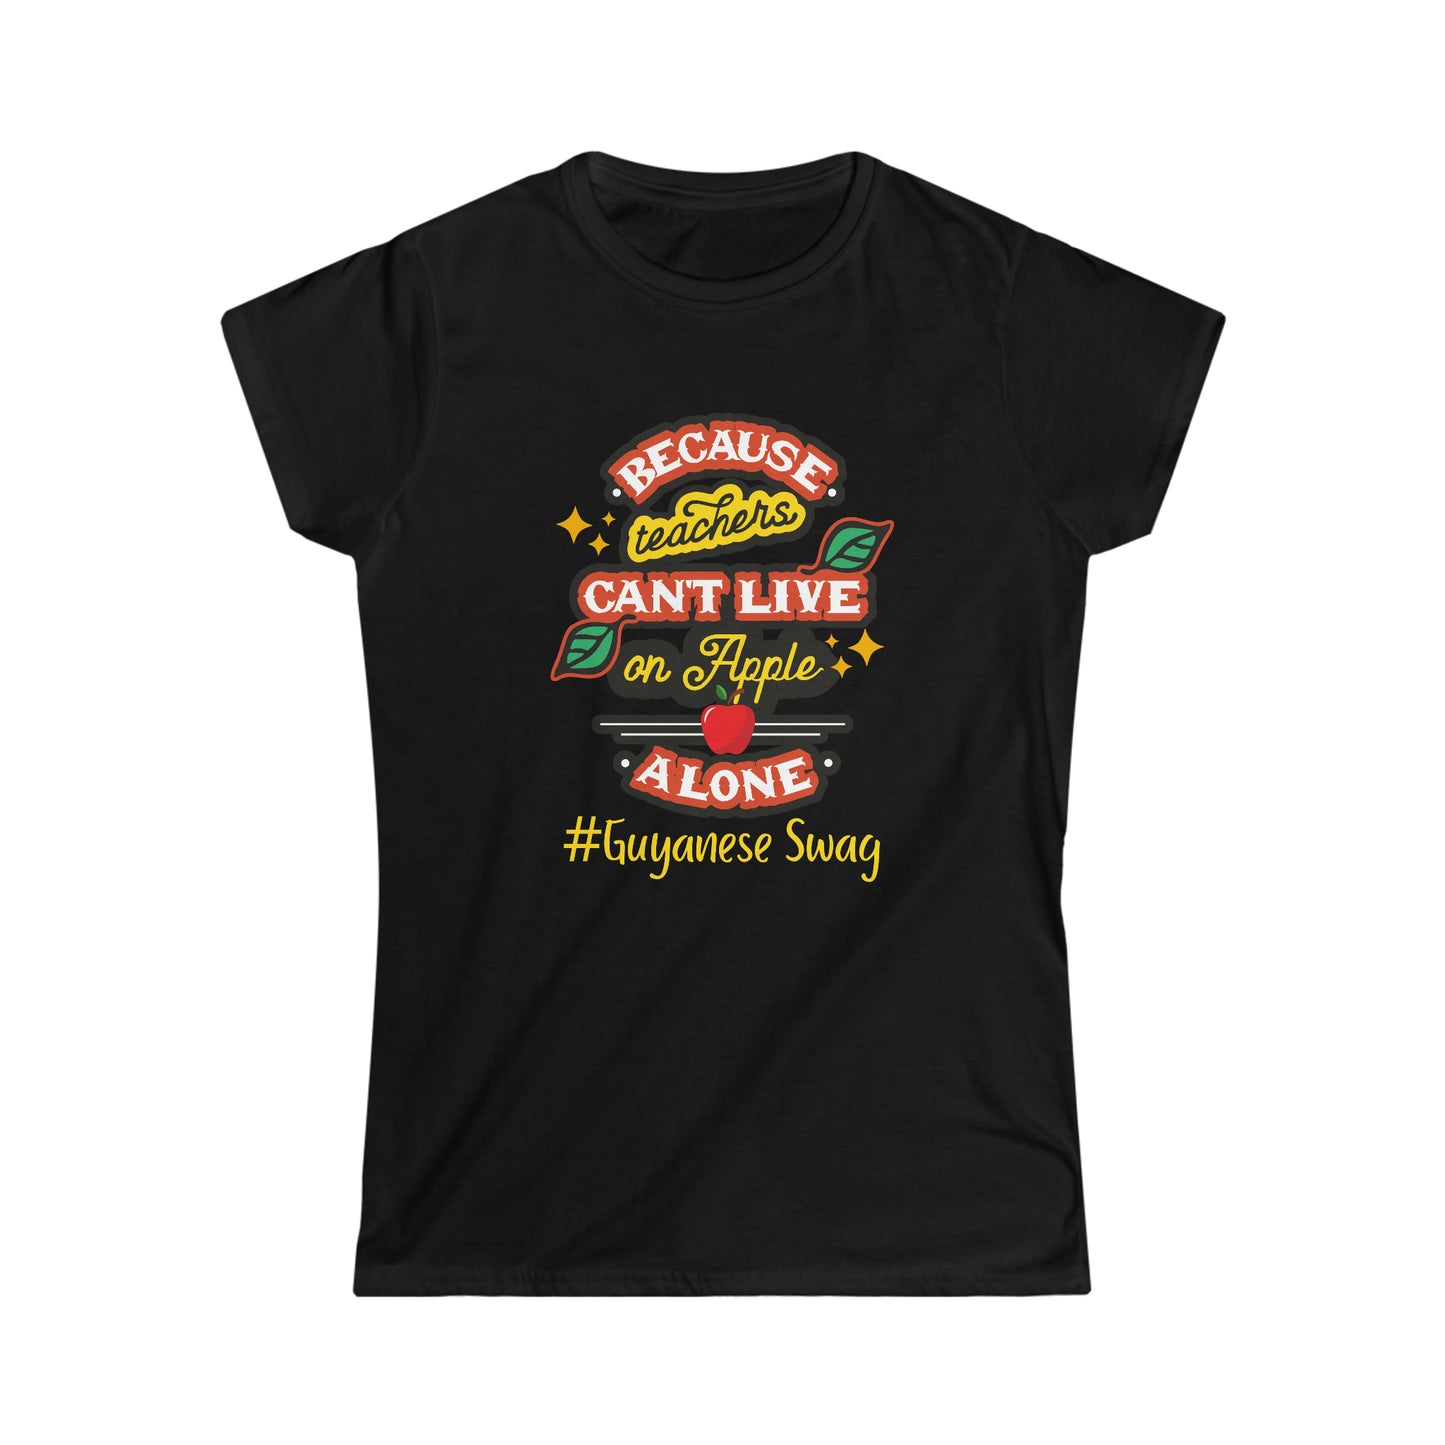 "Because Teachers Can't Live on Apples Alone" woman's black softstyle tee from Guyanese Swag